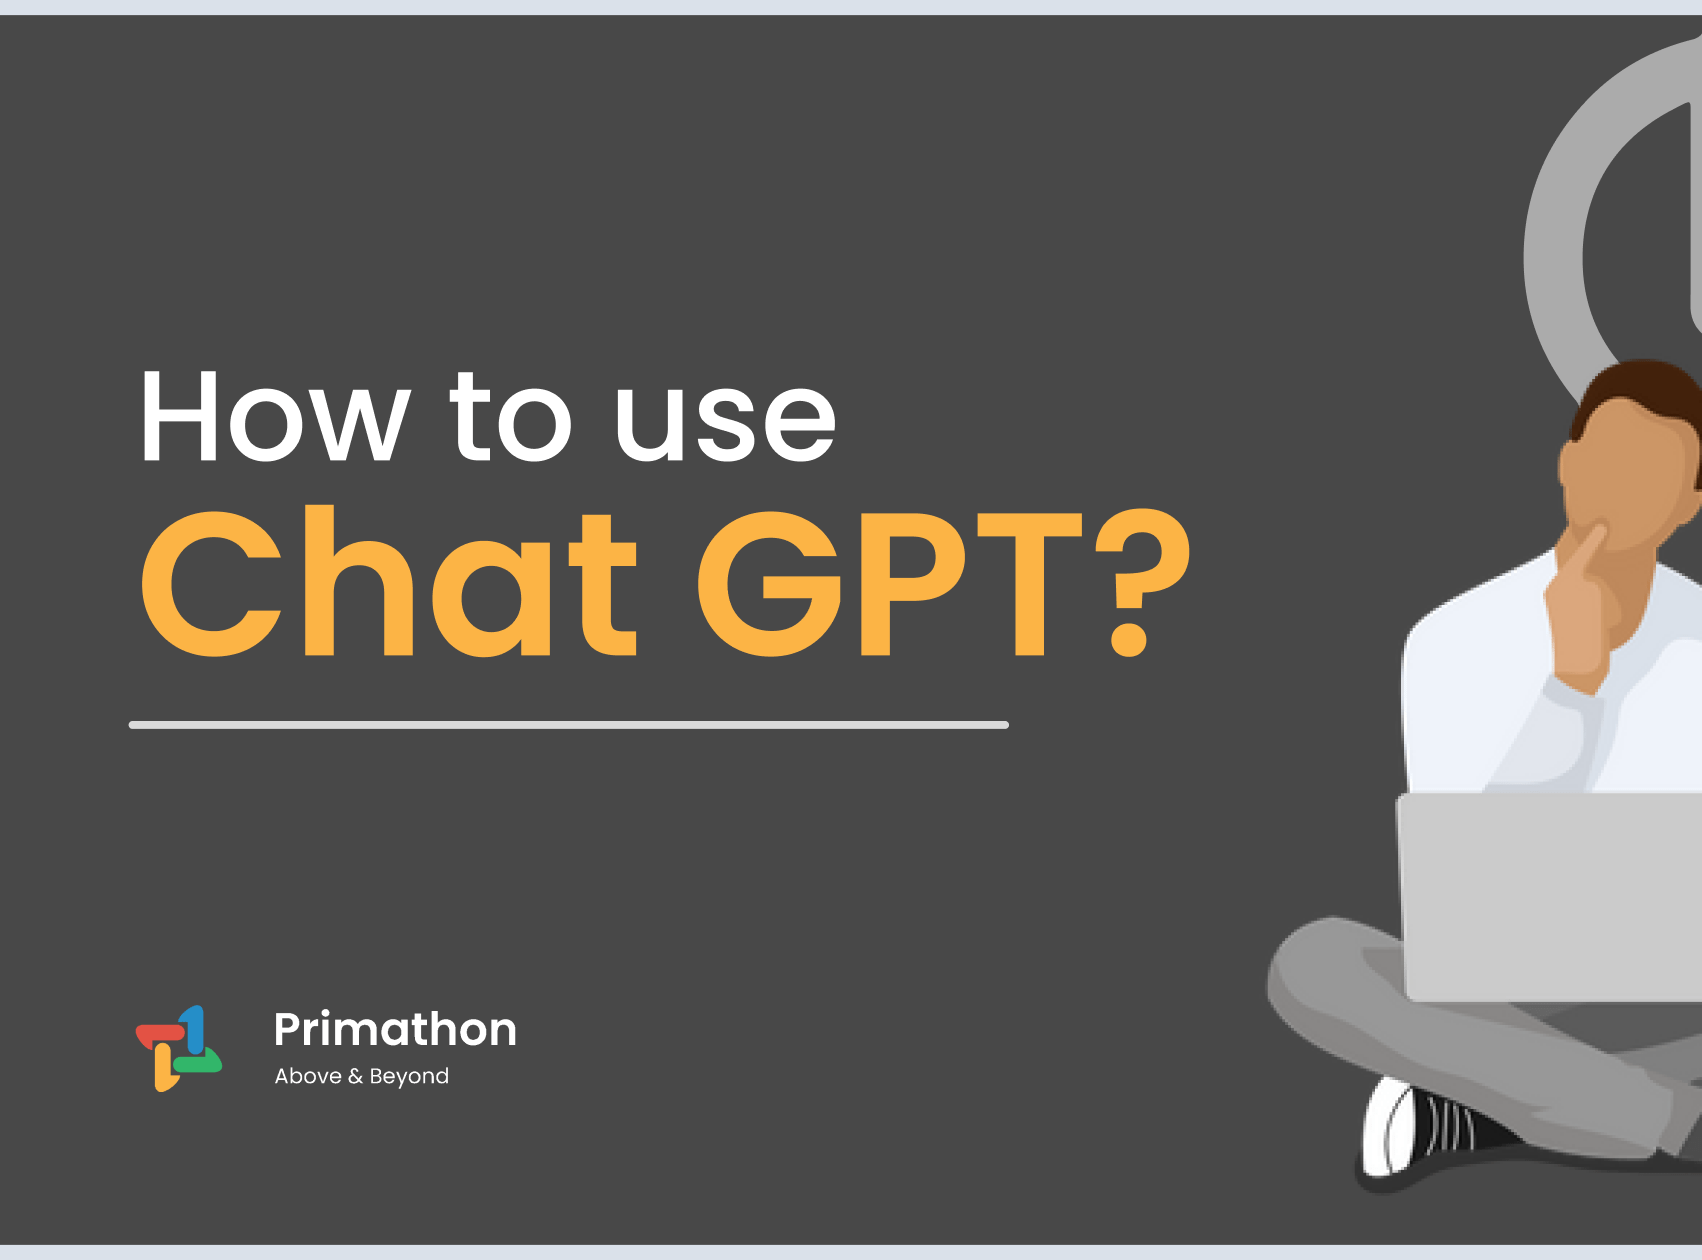 How to use ChatGPT?